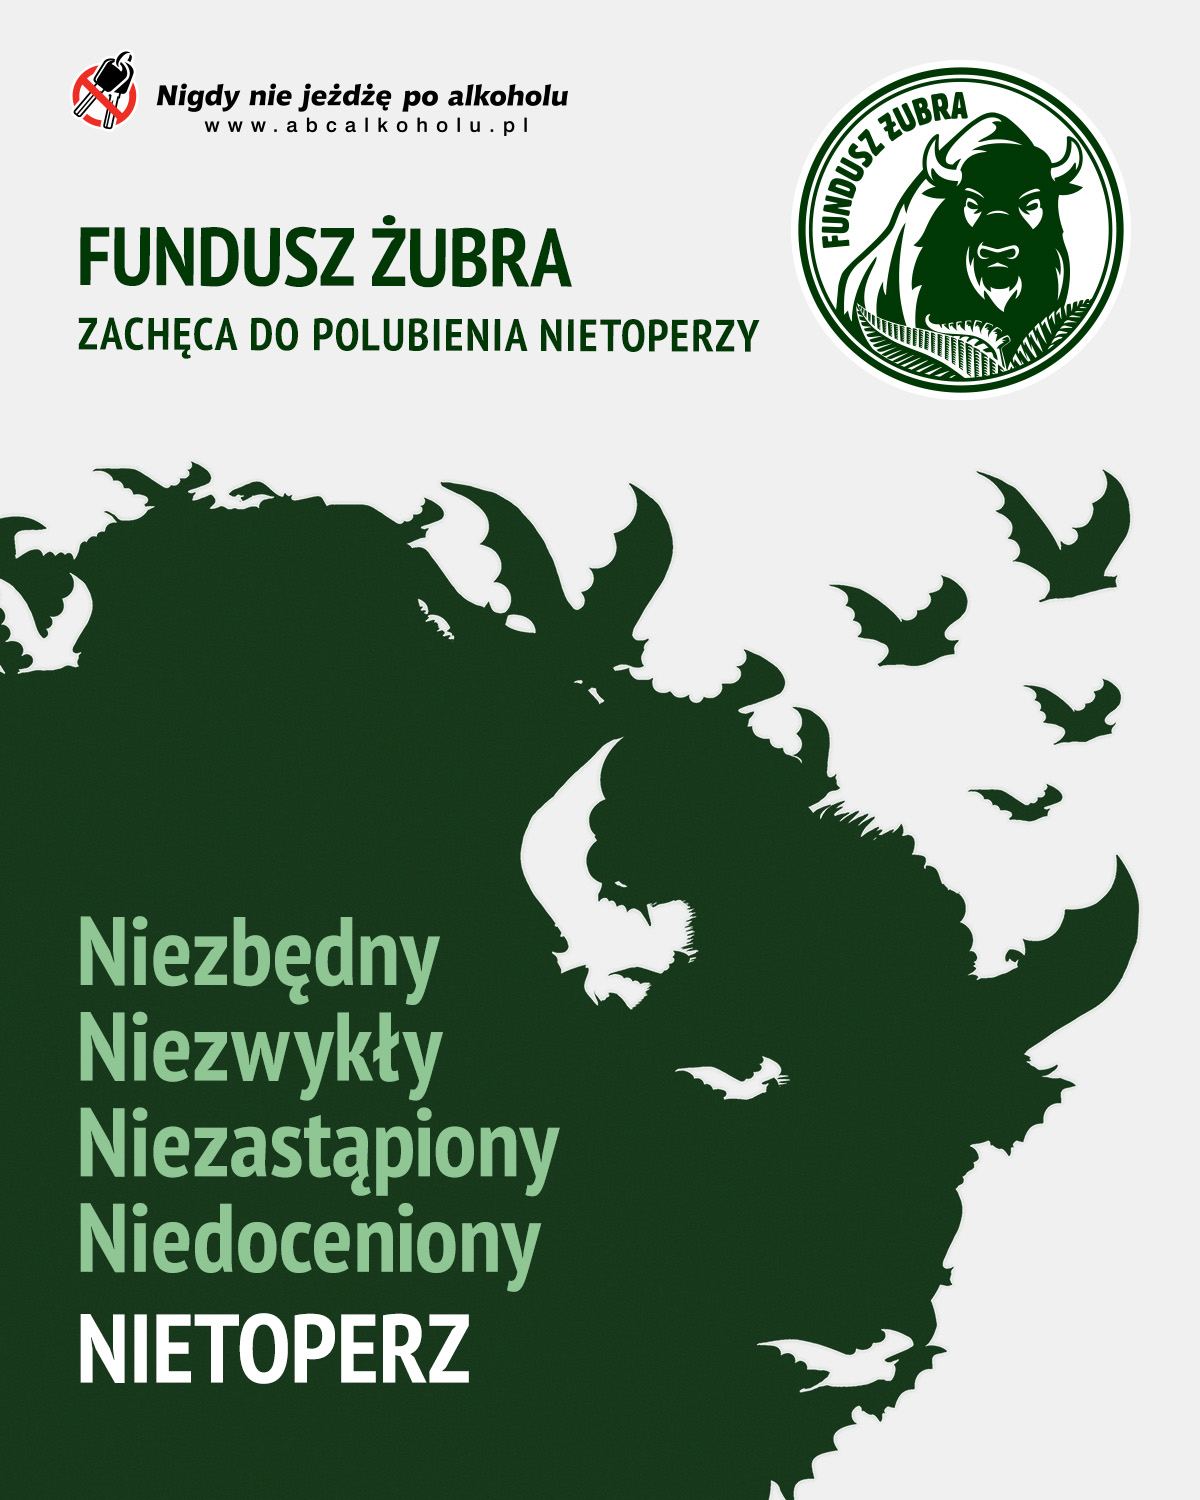 Żubr’s Fund encourages to come to like bats